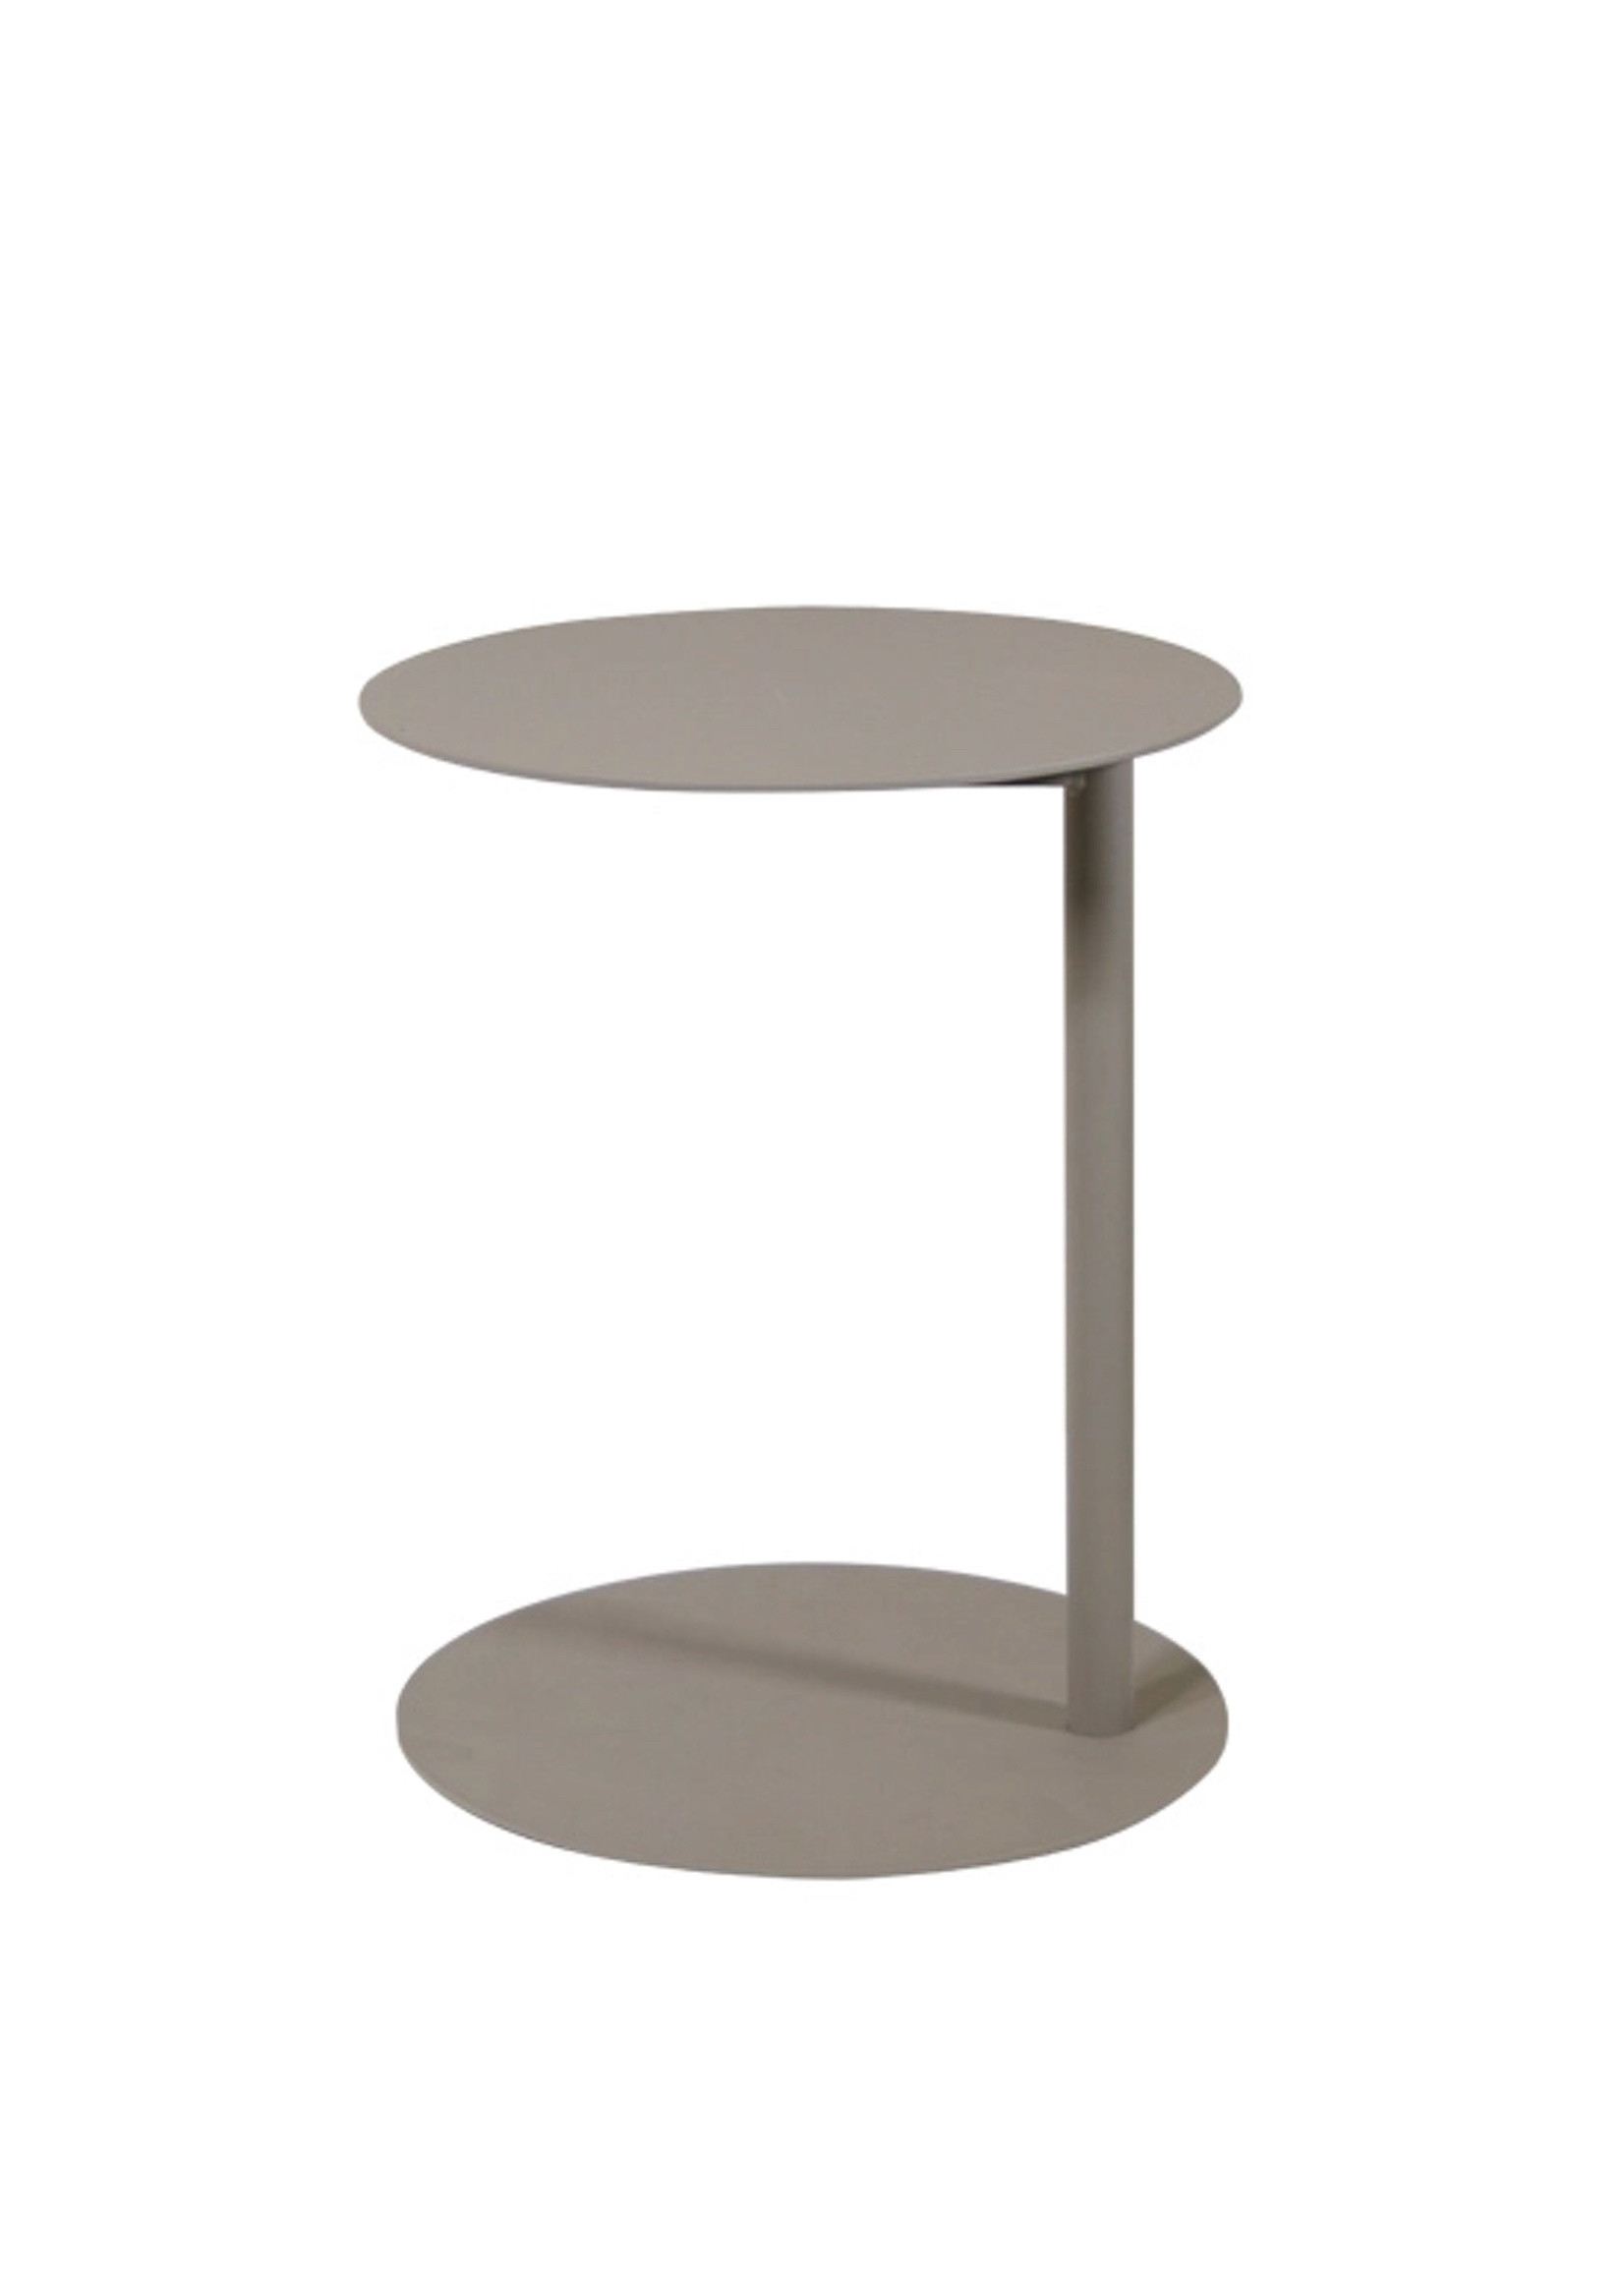 Samera Round Side Table in Taupe